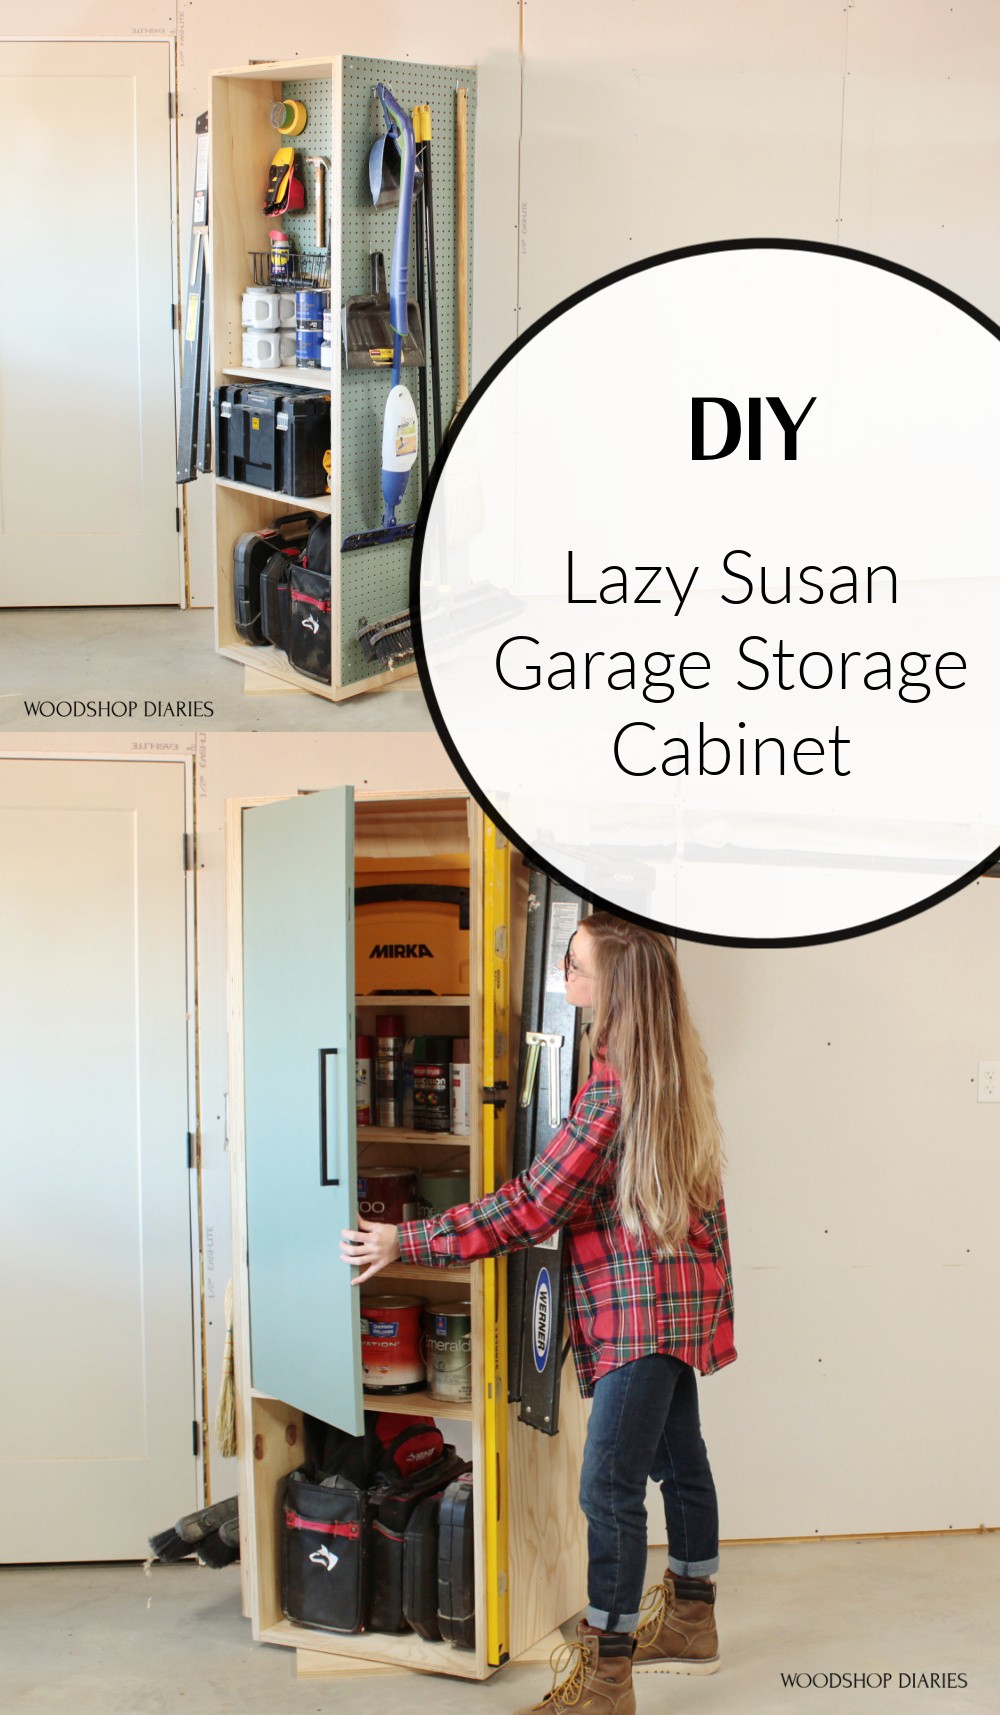 DIY Garage Cabinets - Our Top-Rated Free Project Plans